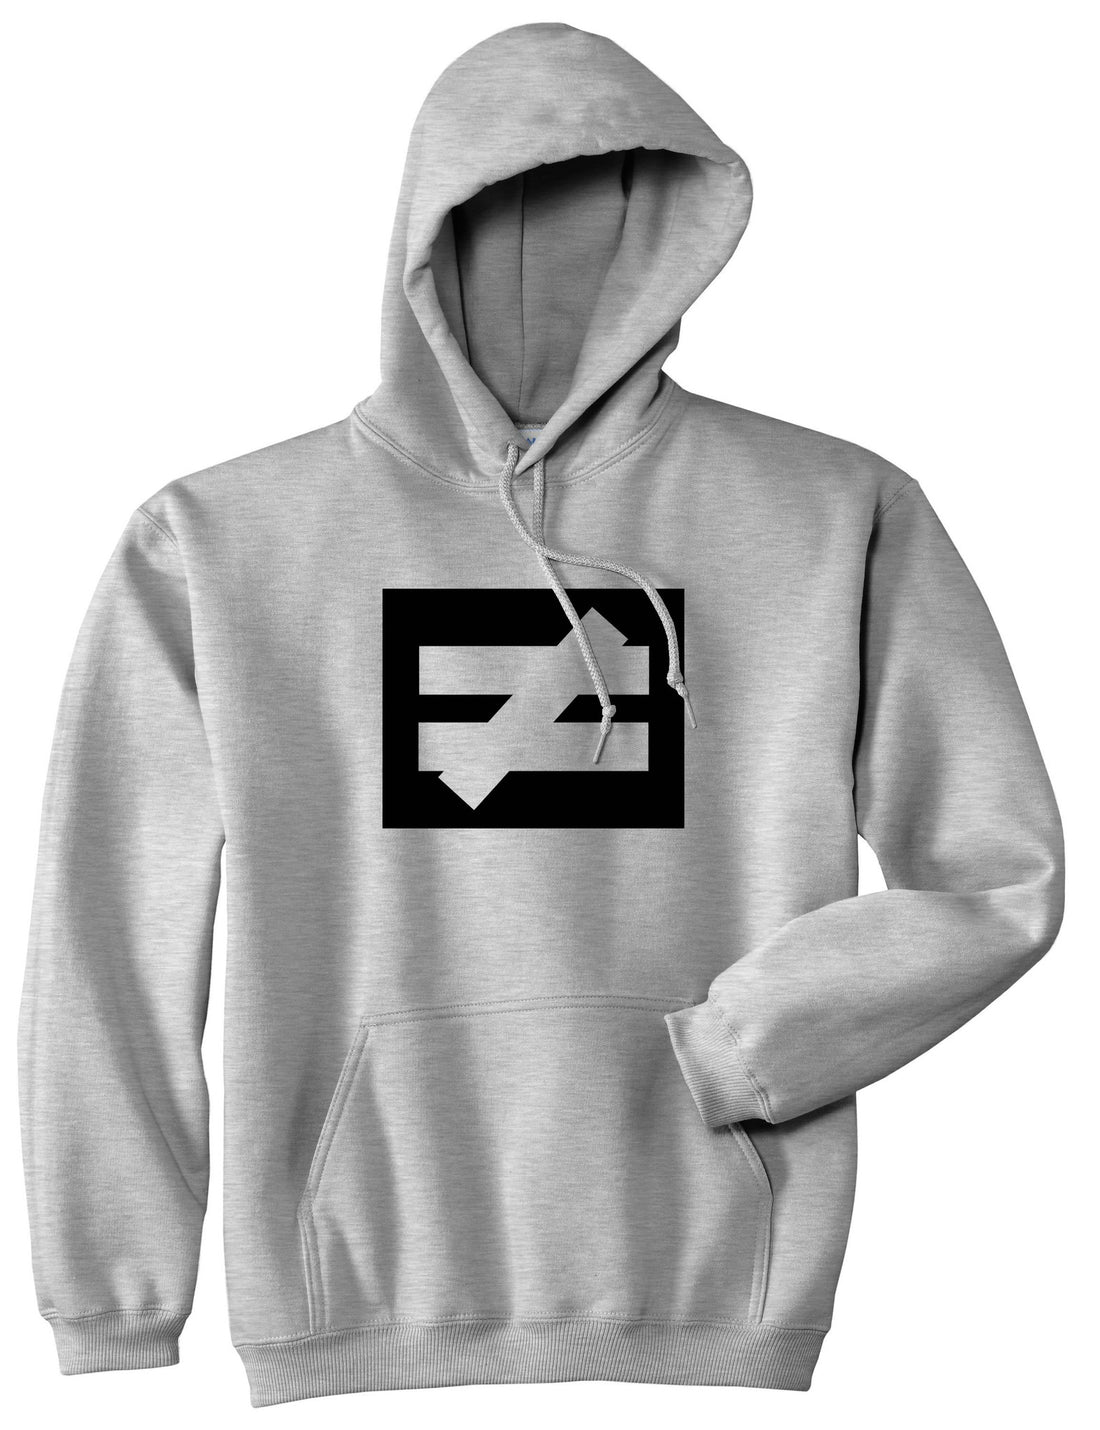 No Equal No Competition Pullover Hoodie Hoody in Grey by Kings Of NY